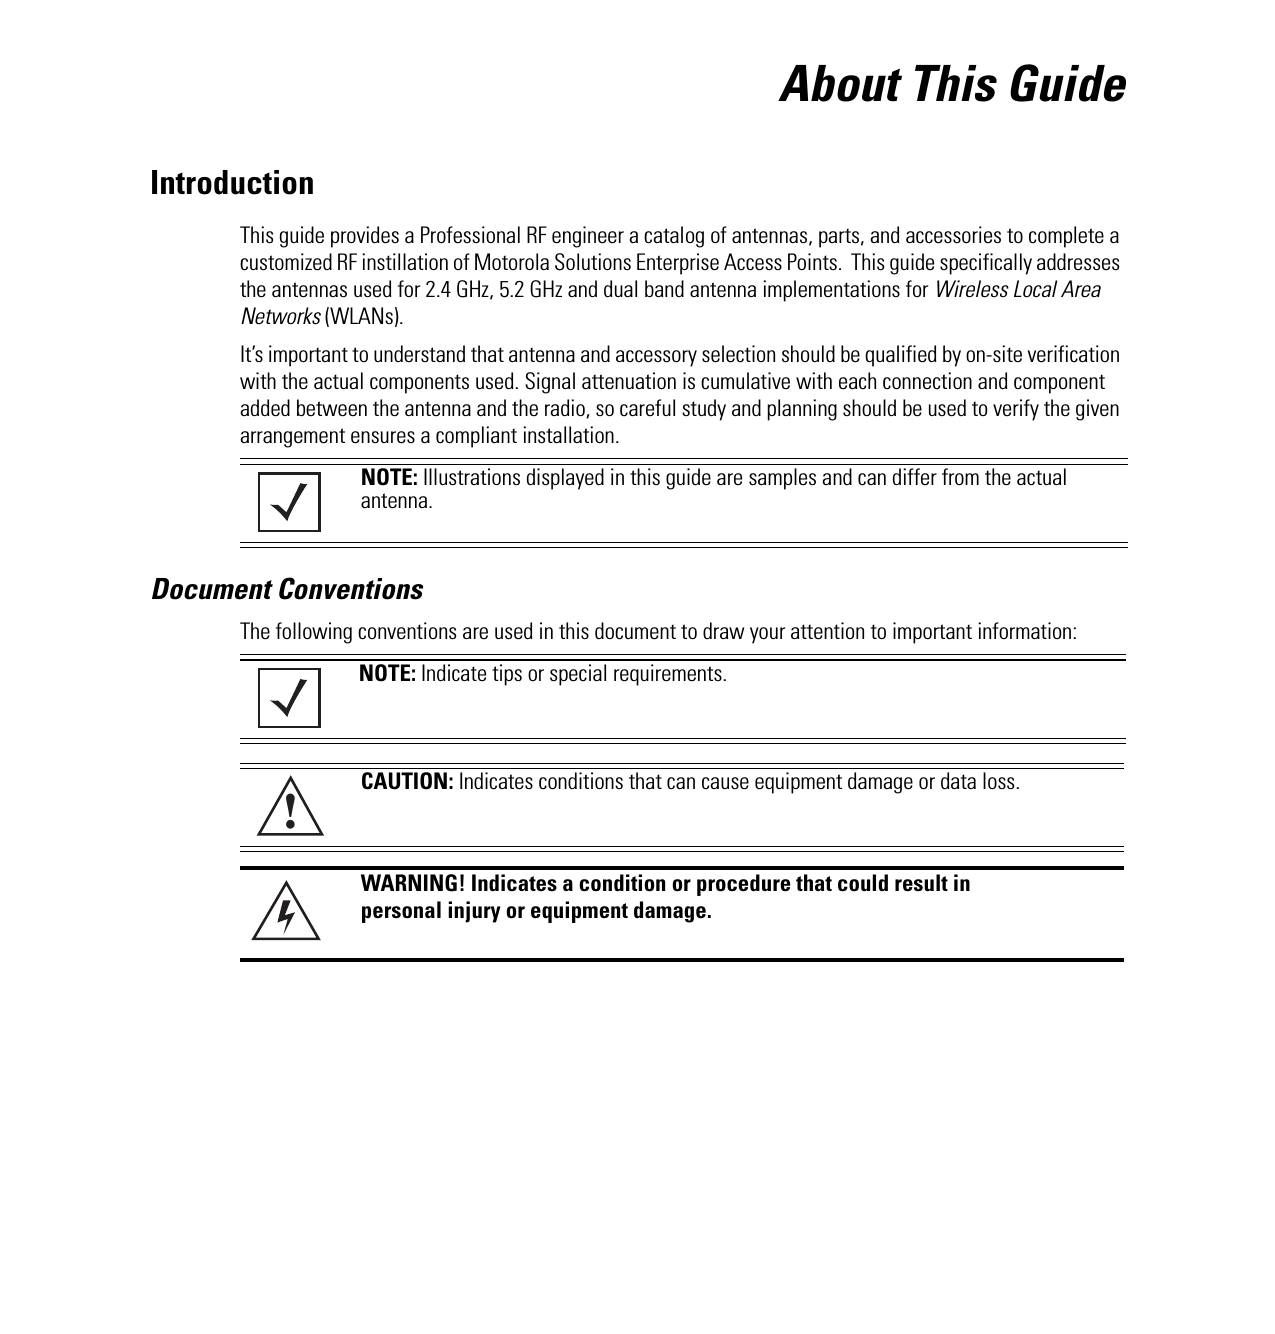 About This GuideIntroductionThis guide provides a Professional RF engineer a catalog of antennas, parts, and accessories to complete a customized RF instillation of Motorola Solutions Enterprise Access Points.  This guide specifically addresses the antennas used for 2.4 GHz, 5.2 GHz and dual band antenna implementations for Wireless Local Area Networks (WLANs). It’s important to understand that antenna and accessory selection should be qualified by on-site verification with the actual components used. Signal attenuation is cumulative with each connection and component added between the antenna and the radio, so careful study and planning should be used to verify the given arrangement ensures a compliant installation. Document ConventionsThe following conventions are used in this document to draw your attention to important information:  NOTE: Illustrations displayed in this guide are samples and can differ from the actual antenna. NOTE: Indicate tips or special requirements.CAUTION: Indicates conditions that can cause equipment damage or data loss.WARNING! Indicates a condition or procedure that could result in personal injury or equipment damage.!